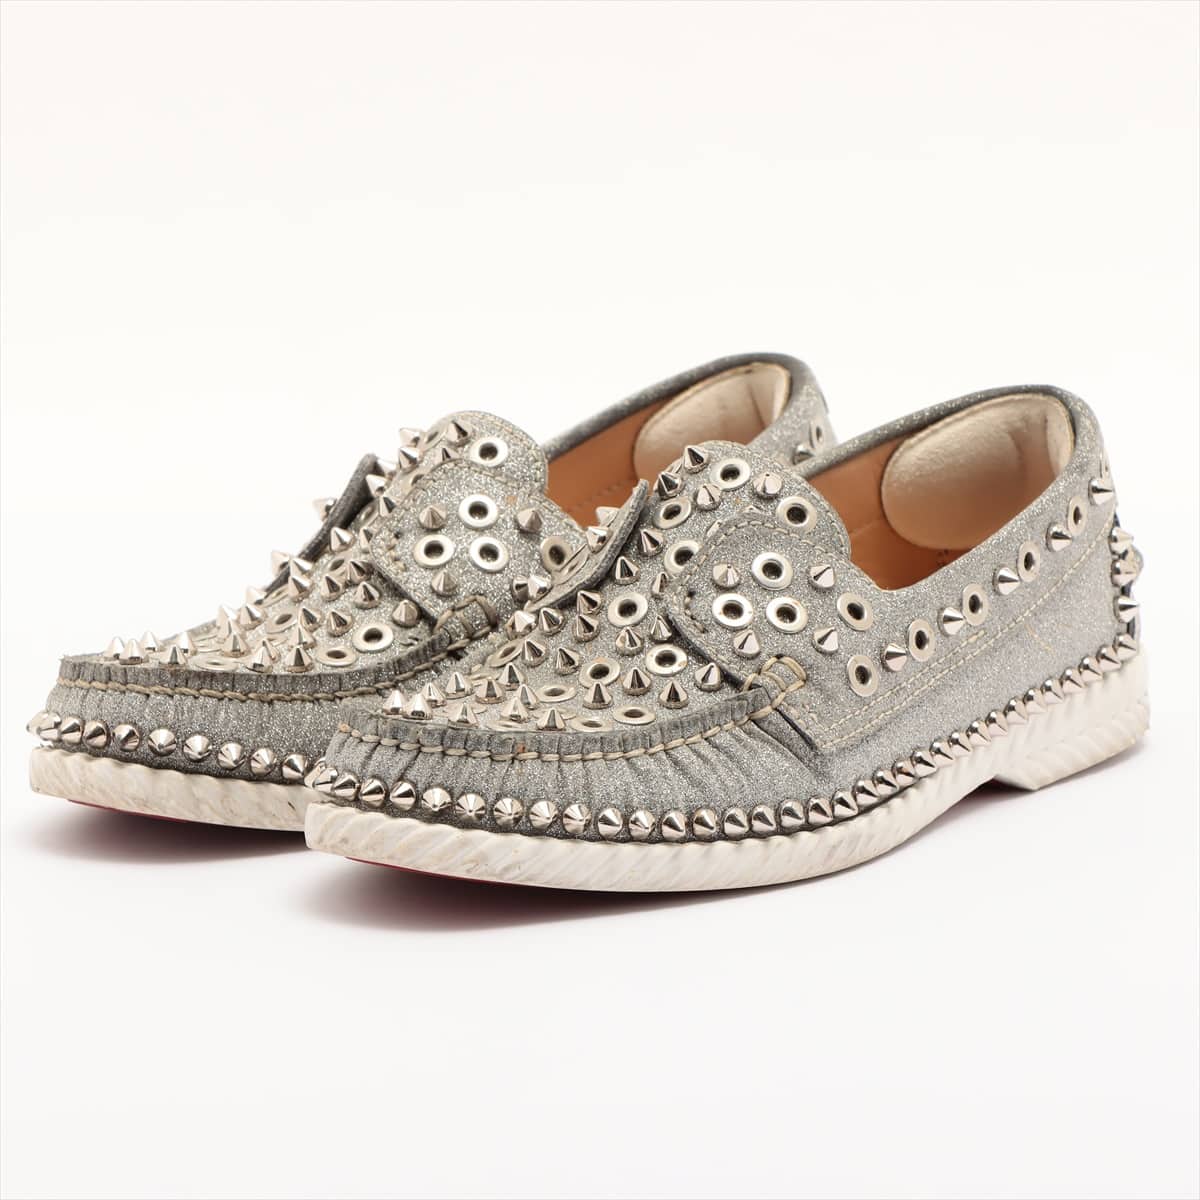 Christian Louboutin Glitter Slip-on 36.5 Ladies' Silver Spike Studs There is a repair on the inside of the heel